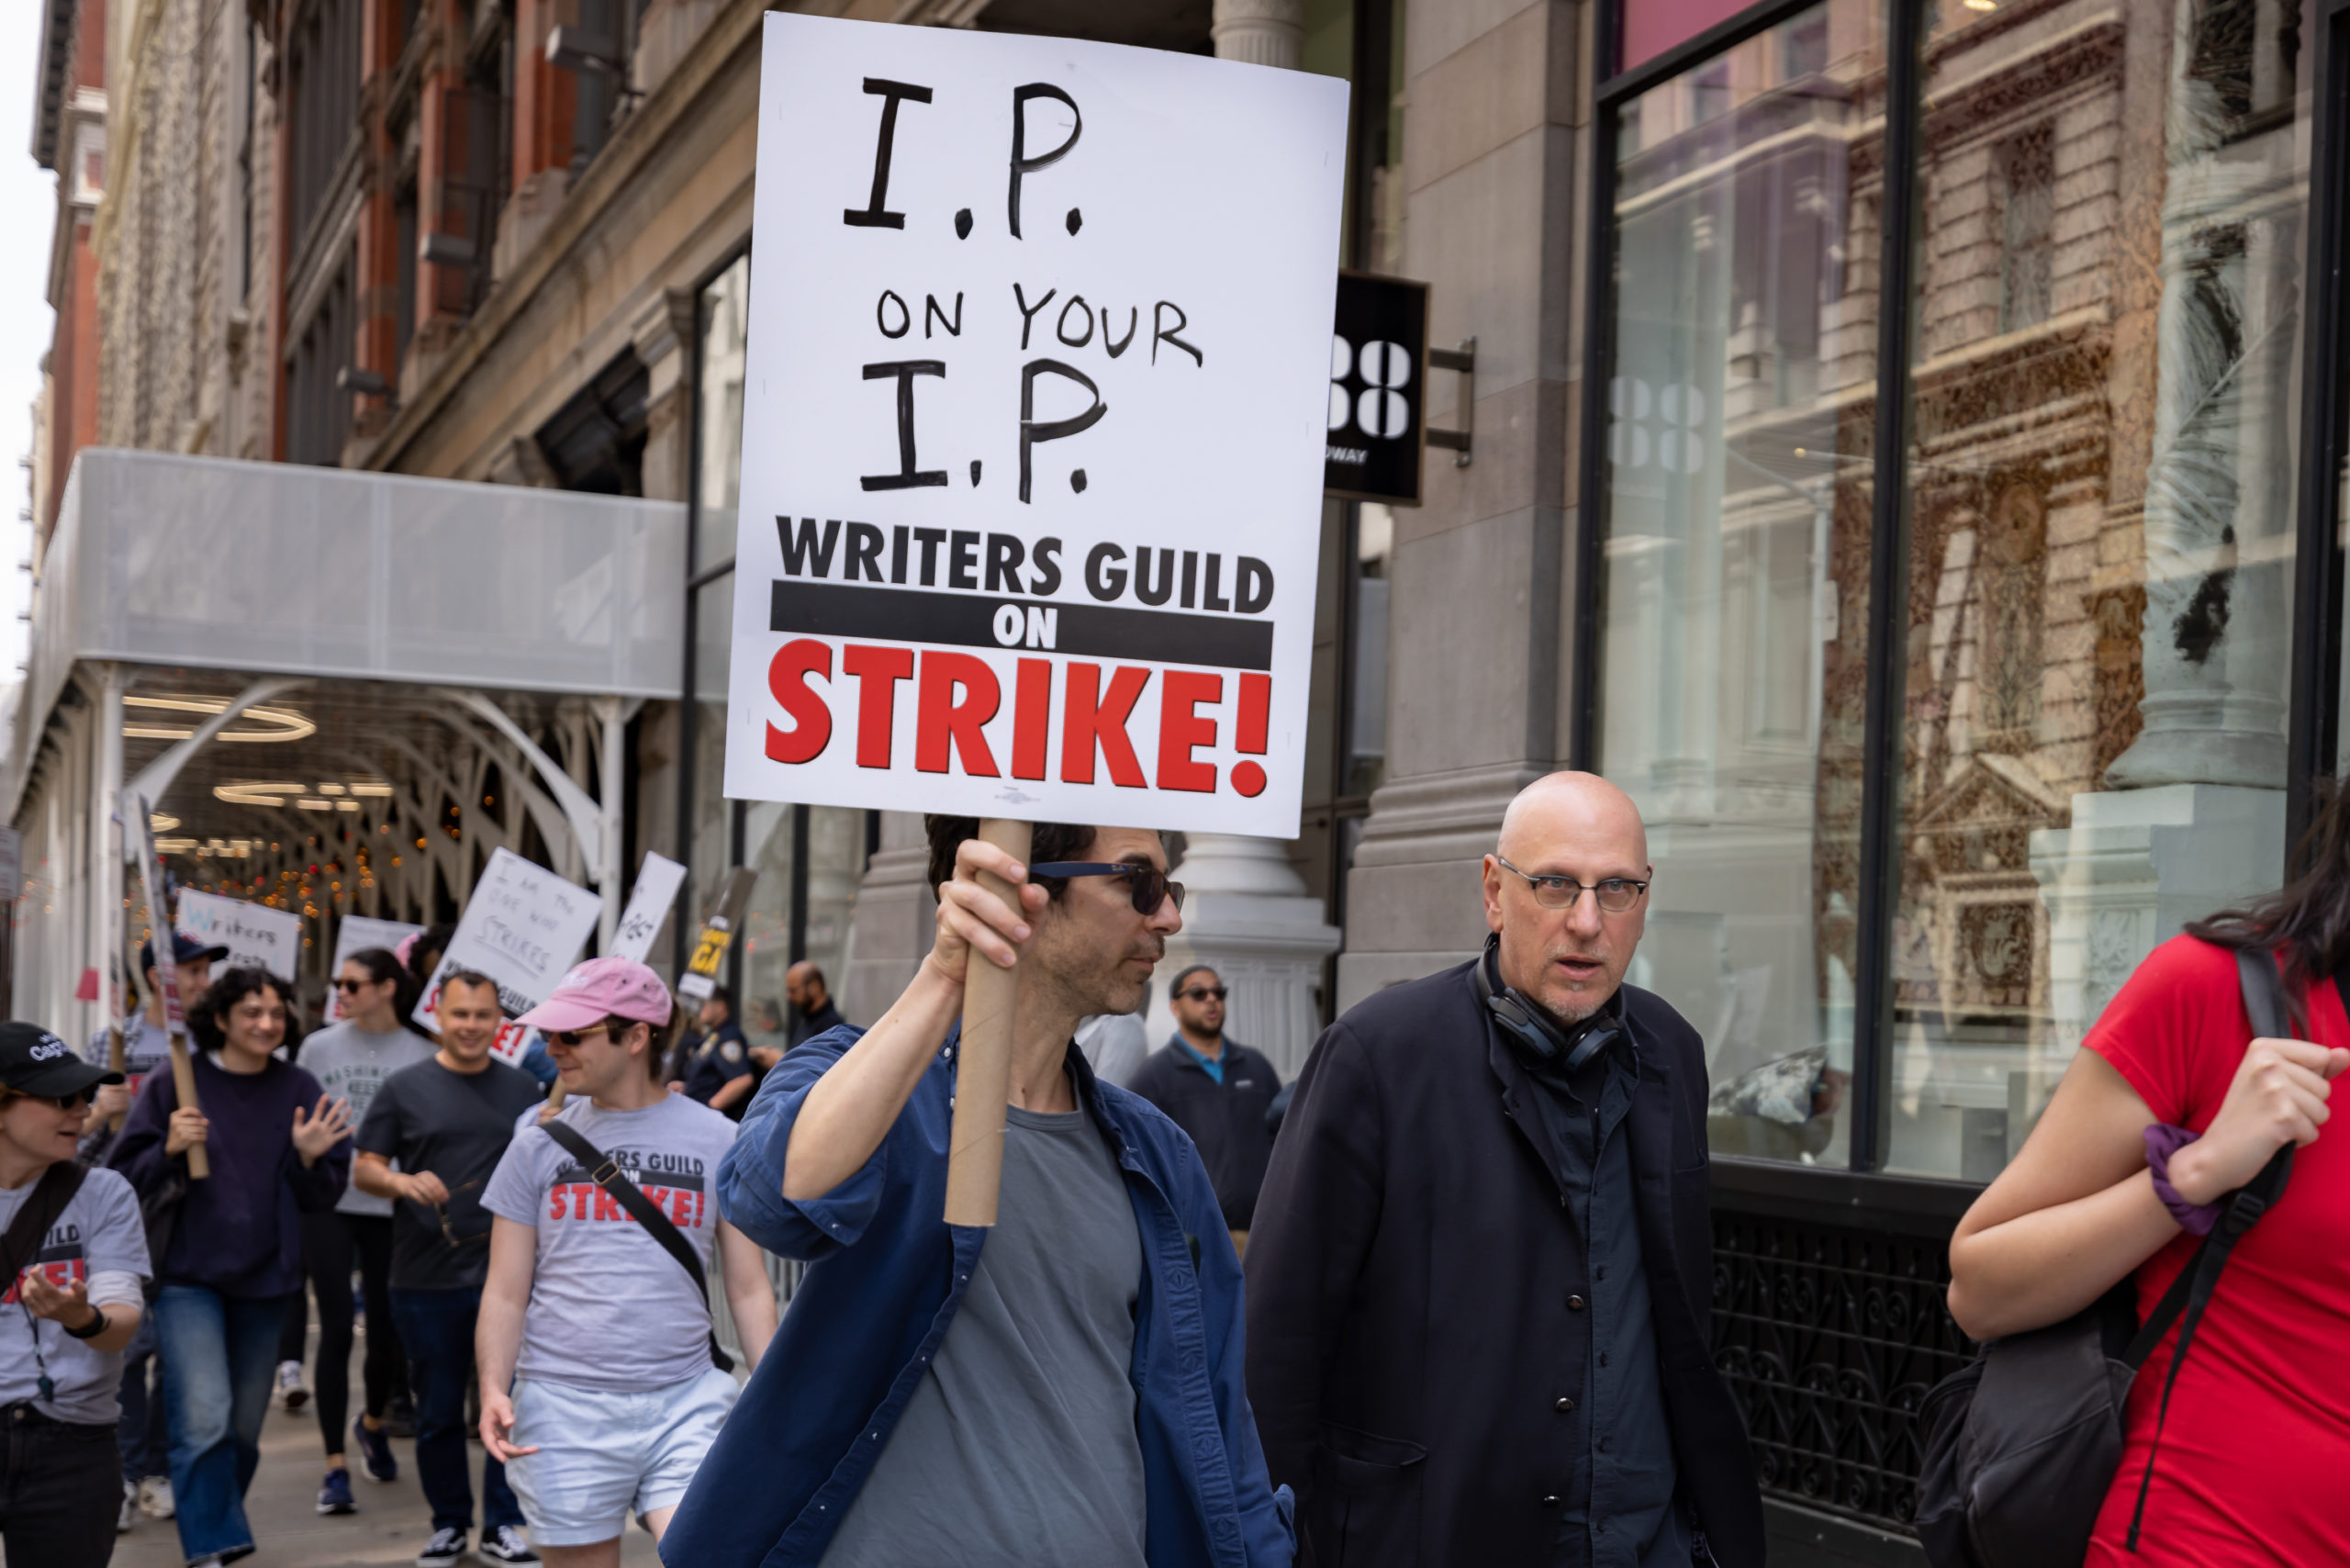 NYC Filming Permits Drop 53% in August, First Full Month of Dual WGA and SAG-AFTRA Strikes